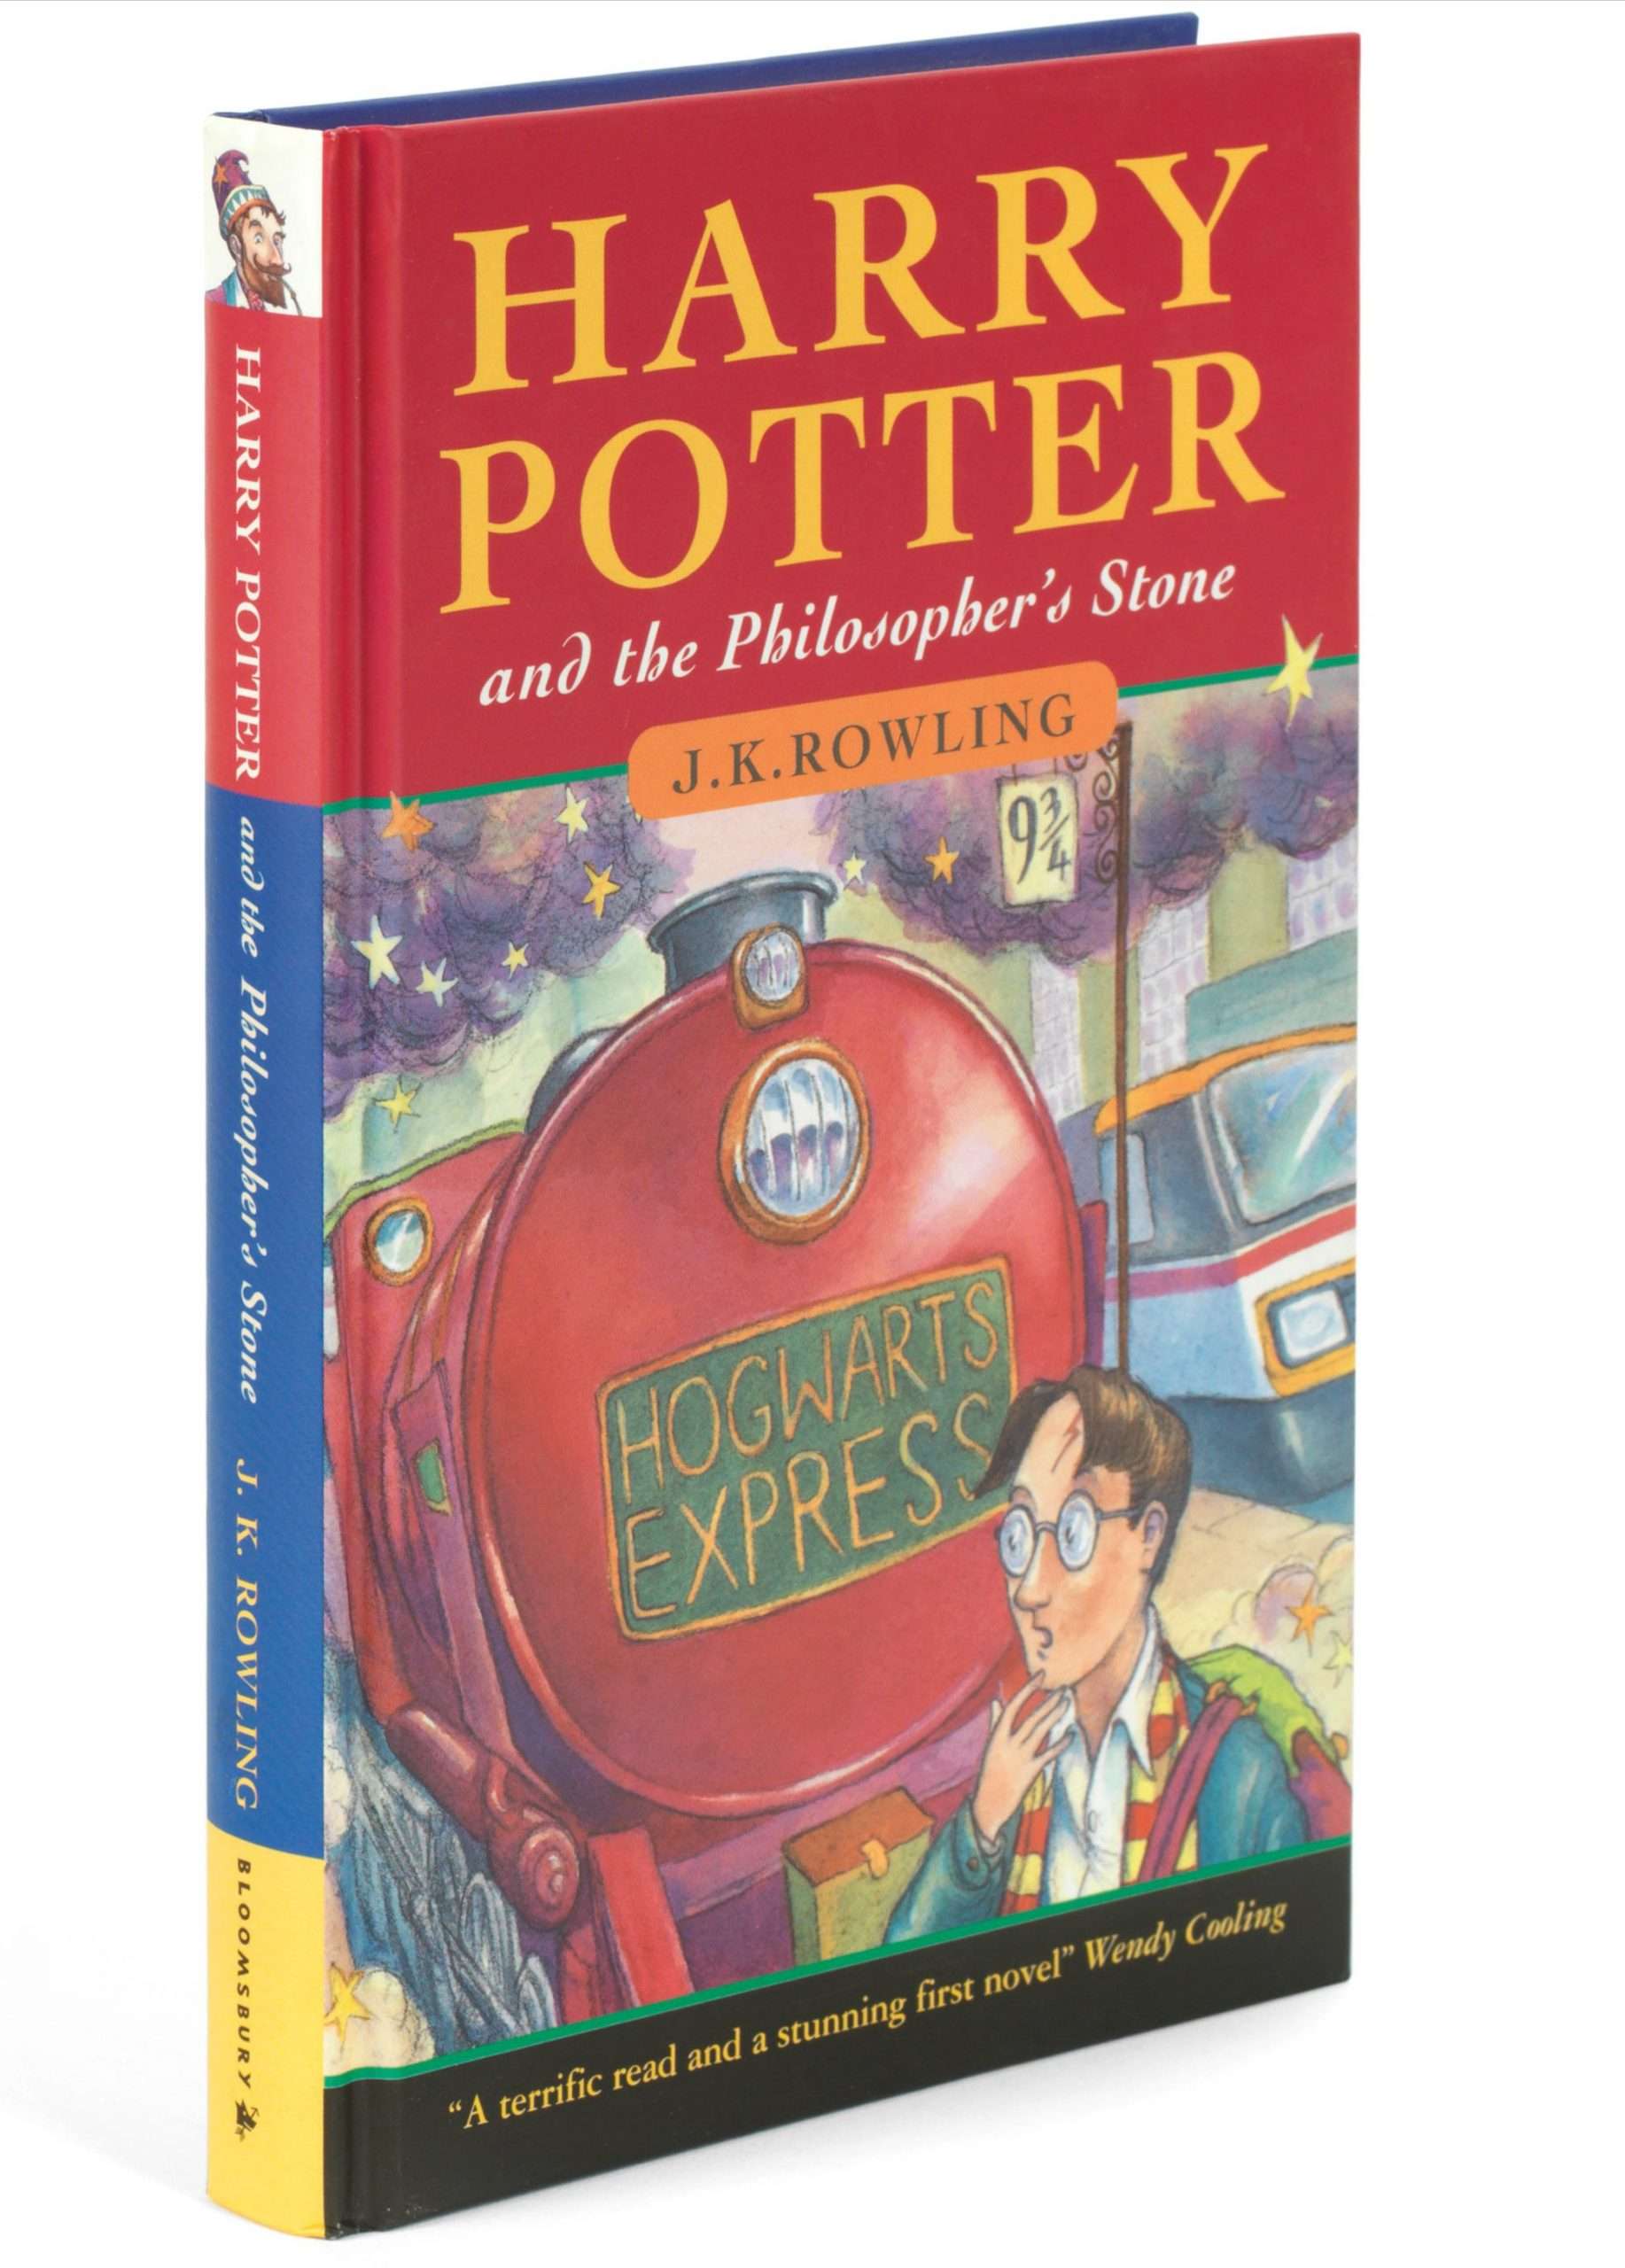 Rare First Edition Error of Harry Potter Book Expected to ...